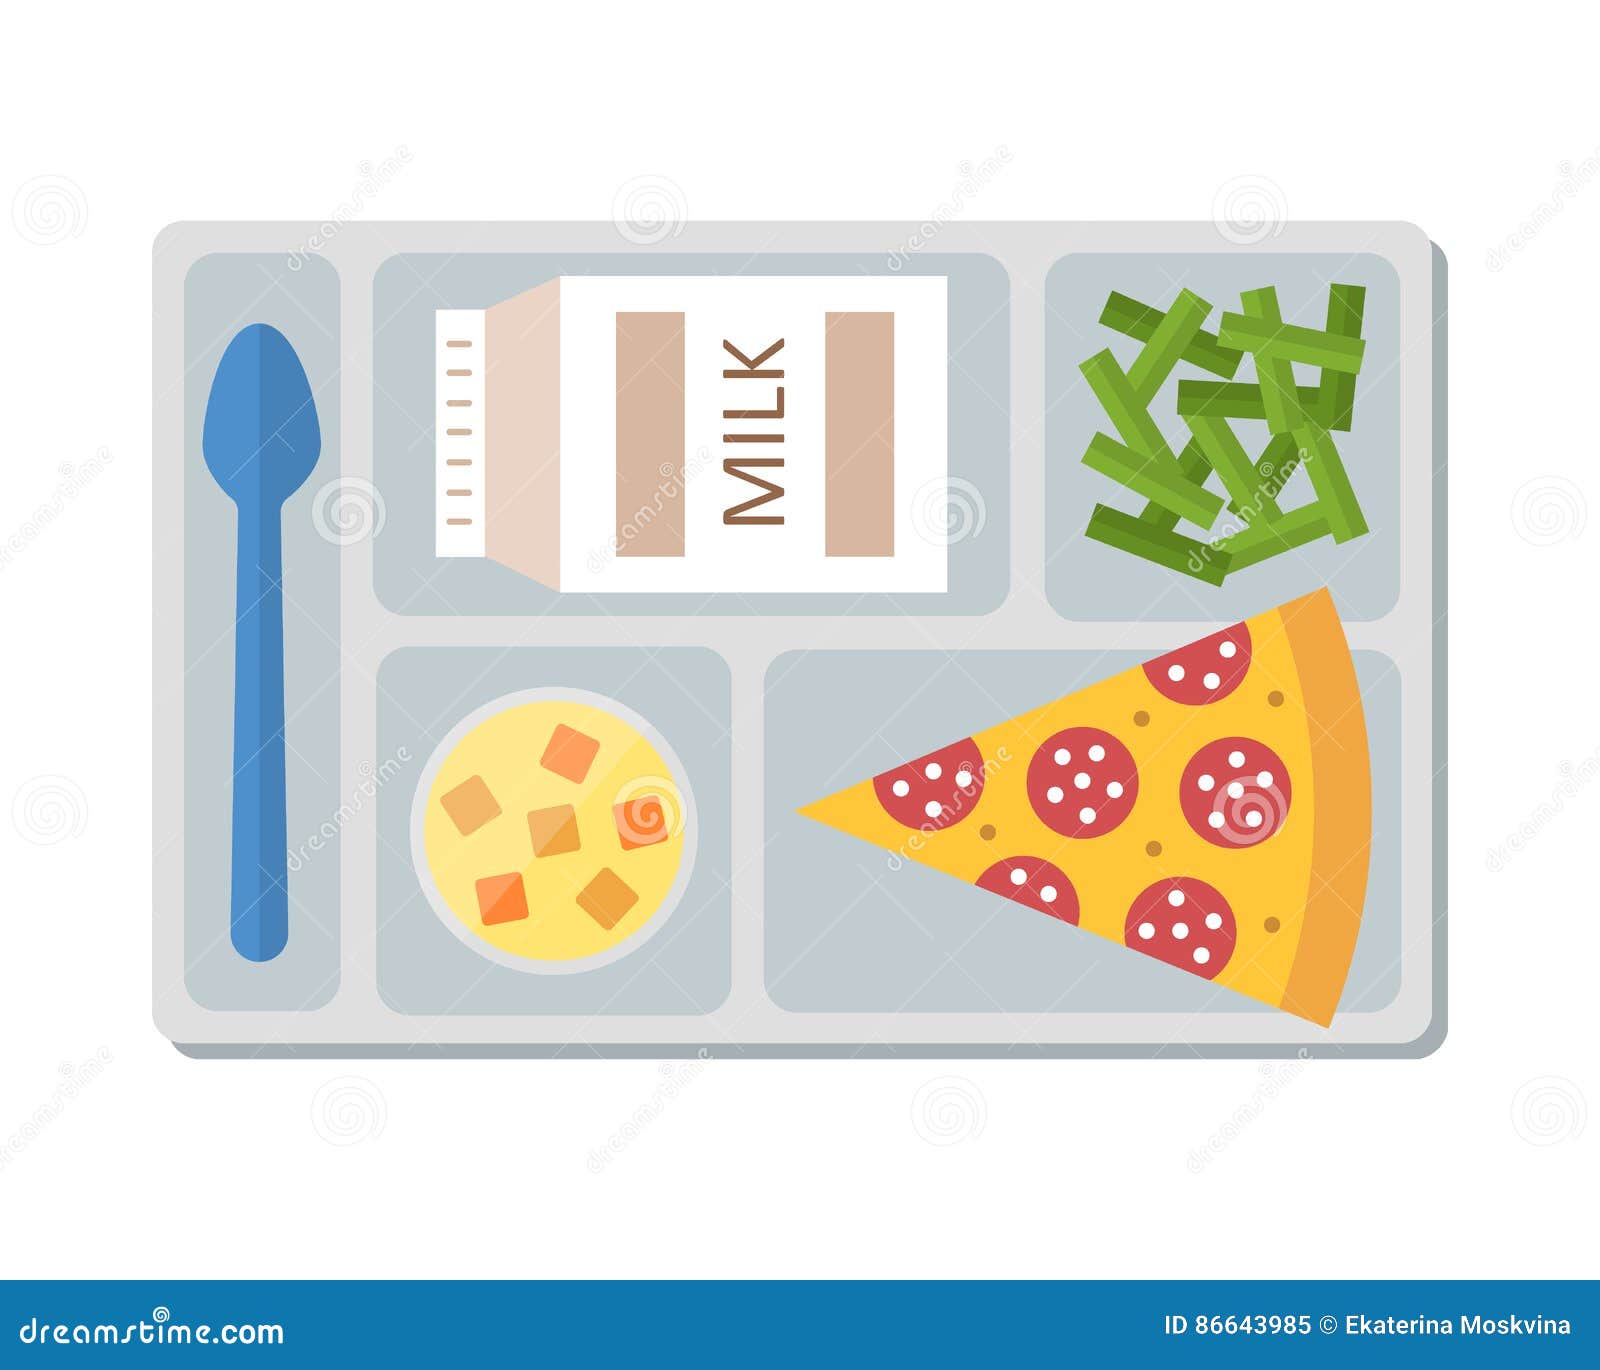 https://thumbs.dreamstime.com/z/lunch-tray-line-style-pepperoni-pizza-chocolate-milk-green-beans-fruit-jelly-flat-design-vector-illustration-86643985.jpg